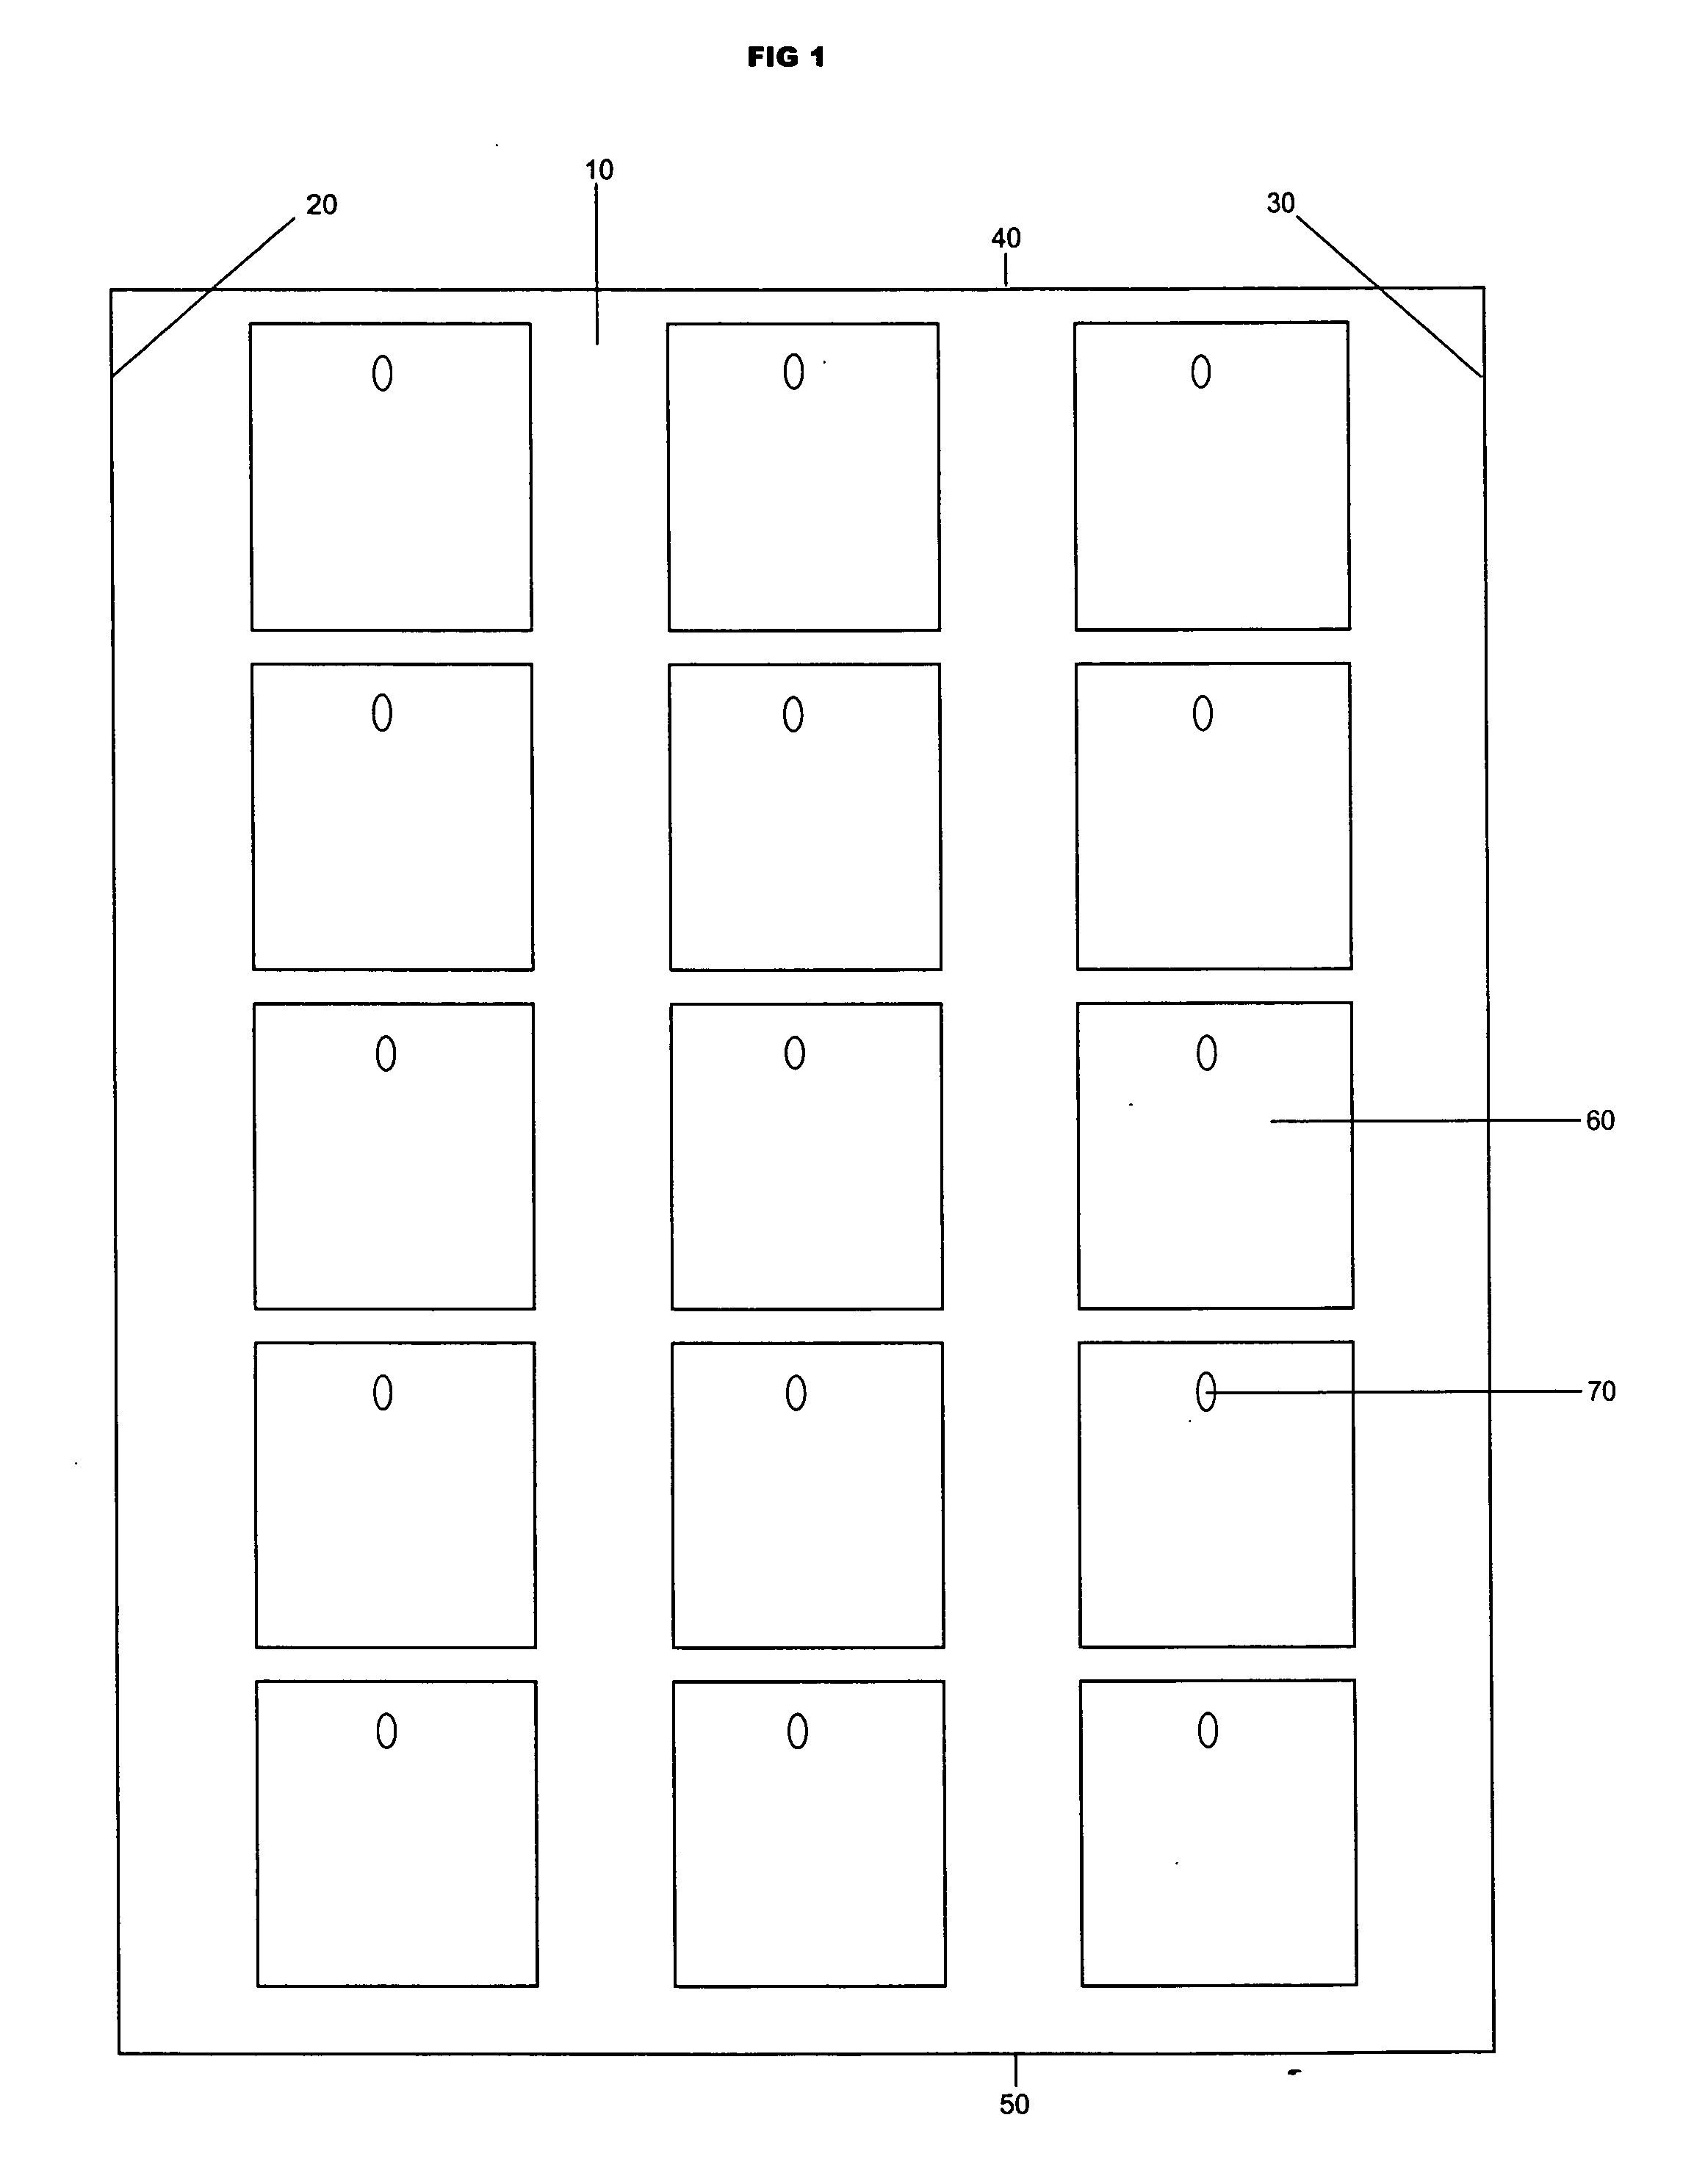 Composite form assembly with frangible bonded layers formed in-situ